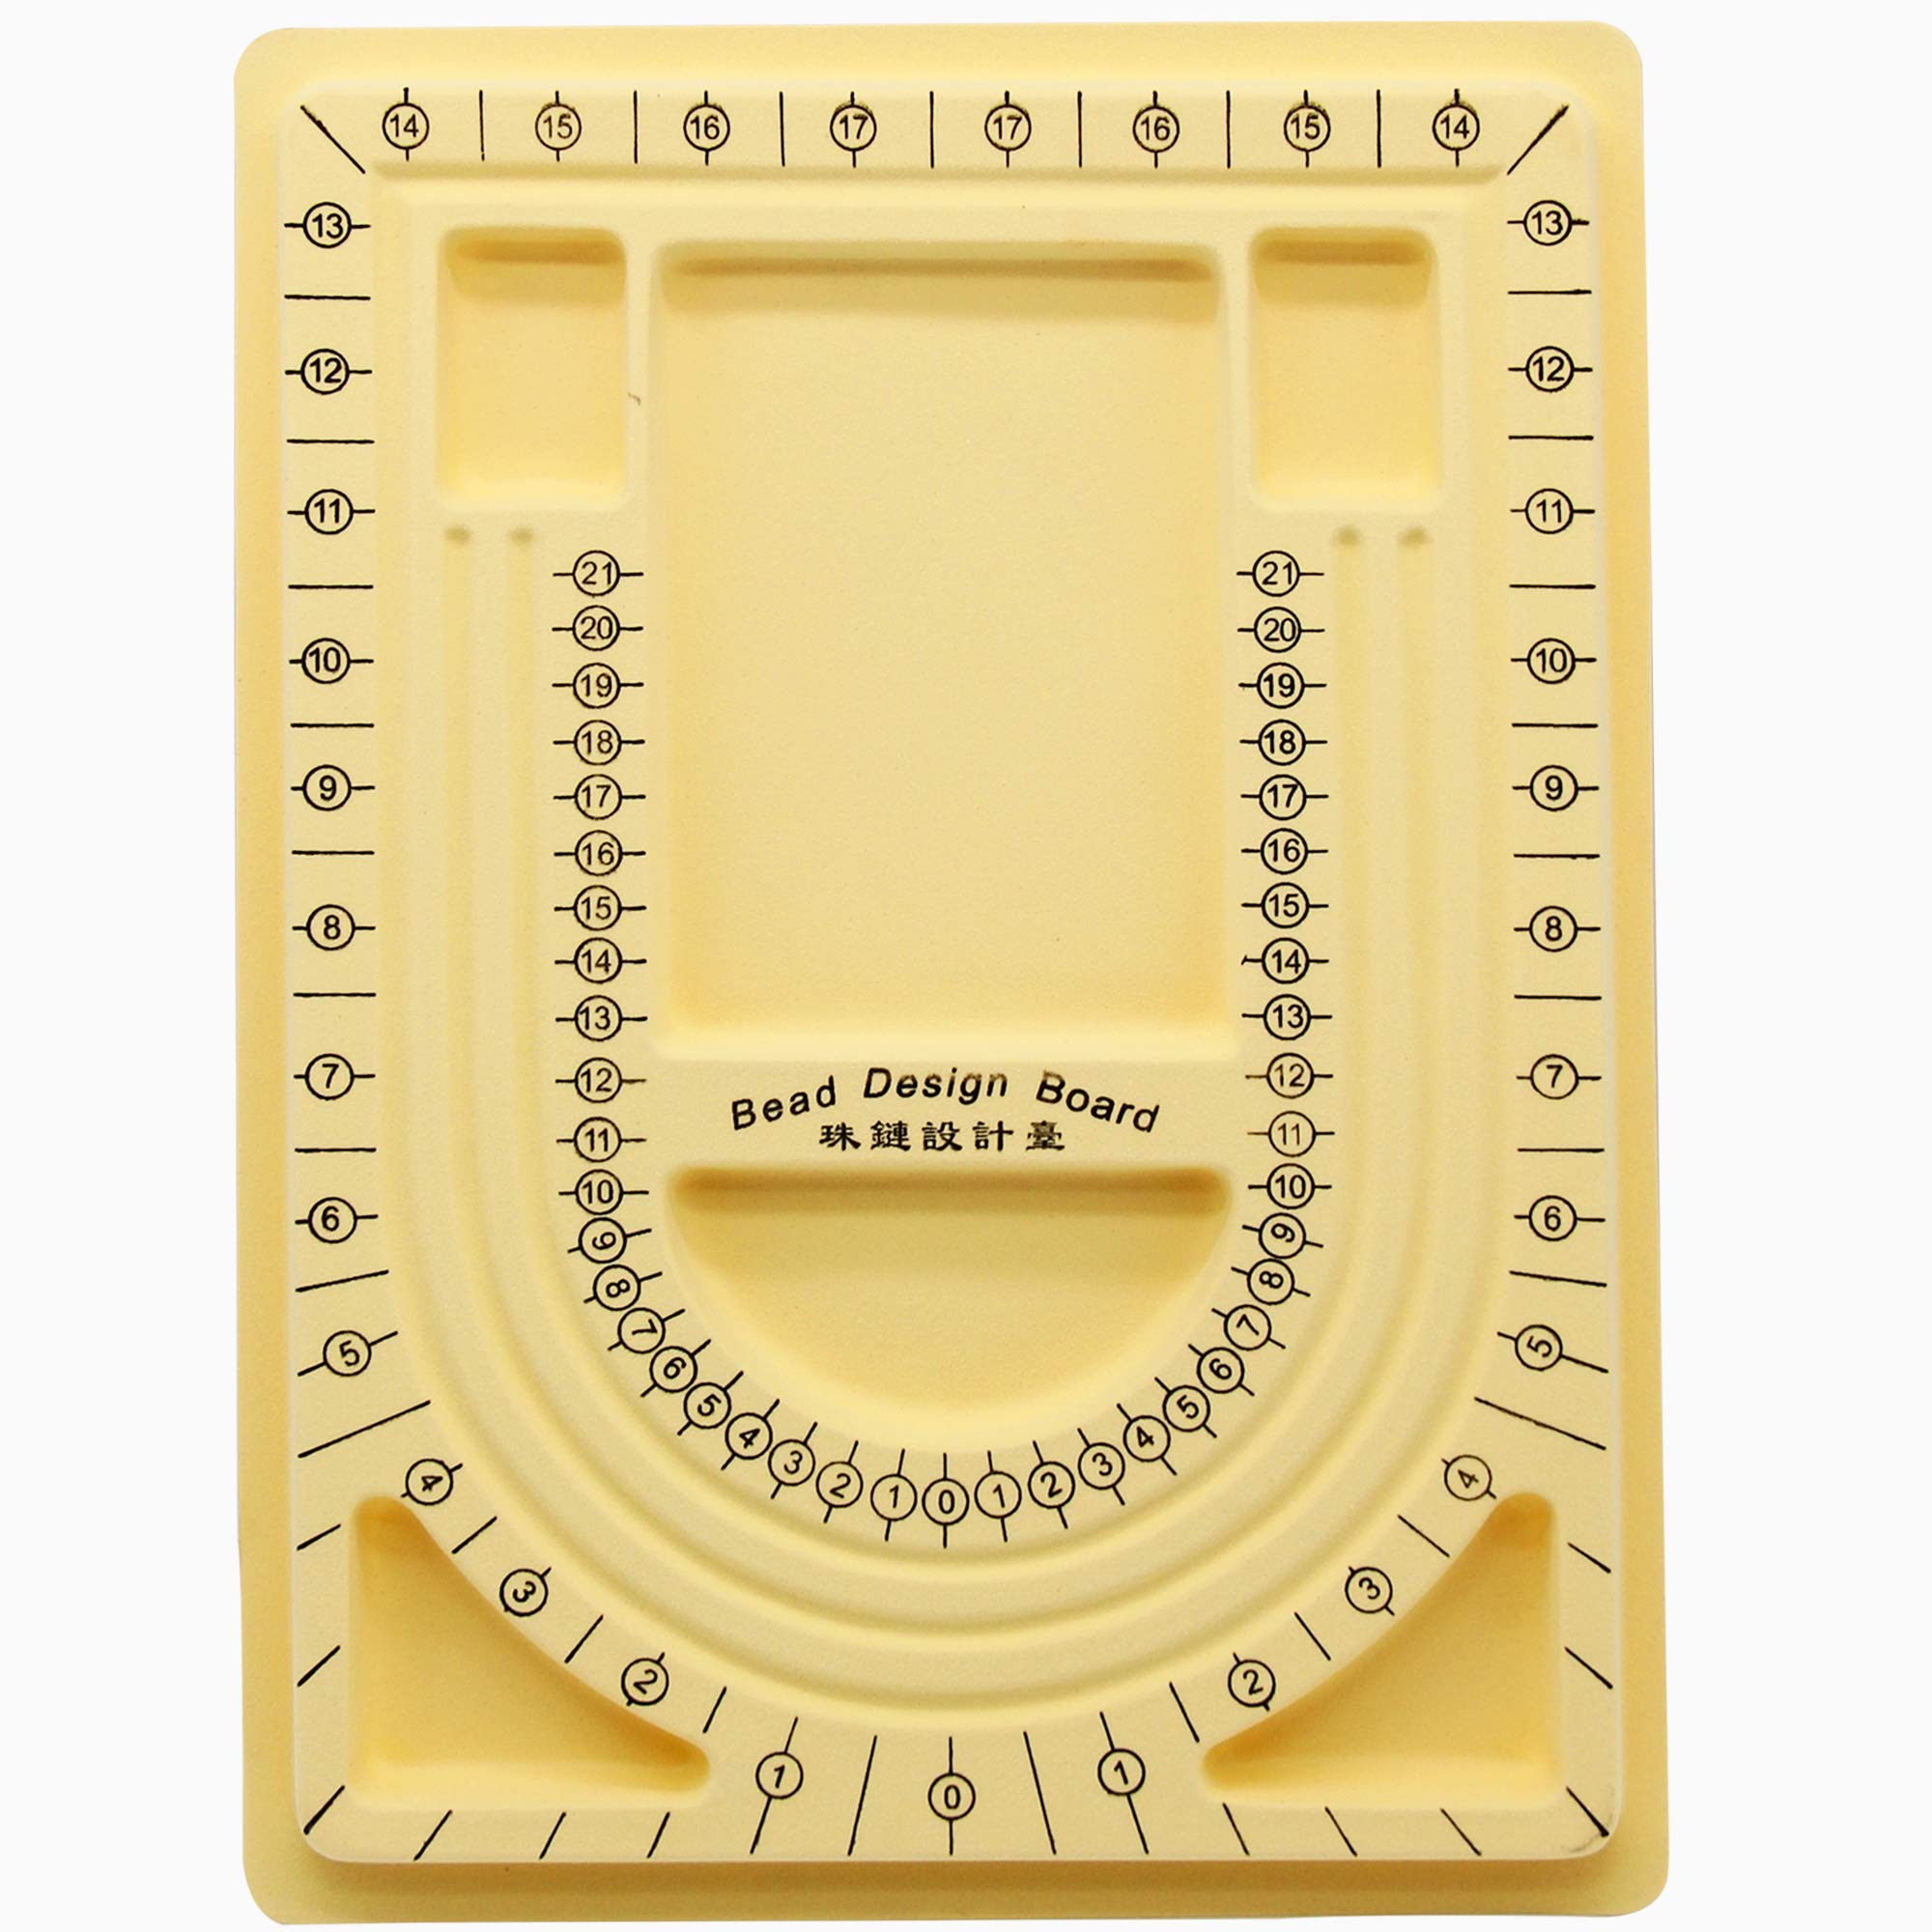 H&W Yellow Bead Board with Flock, 9.5 by 12.9-inch, Design Beading Board  Tray DIY Craft Tool for Girl and Necklace Beading Jewelry Designer